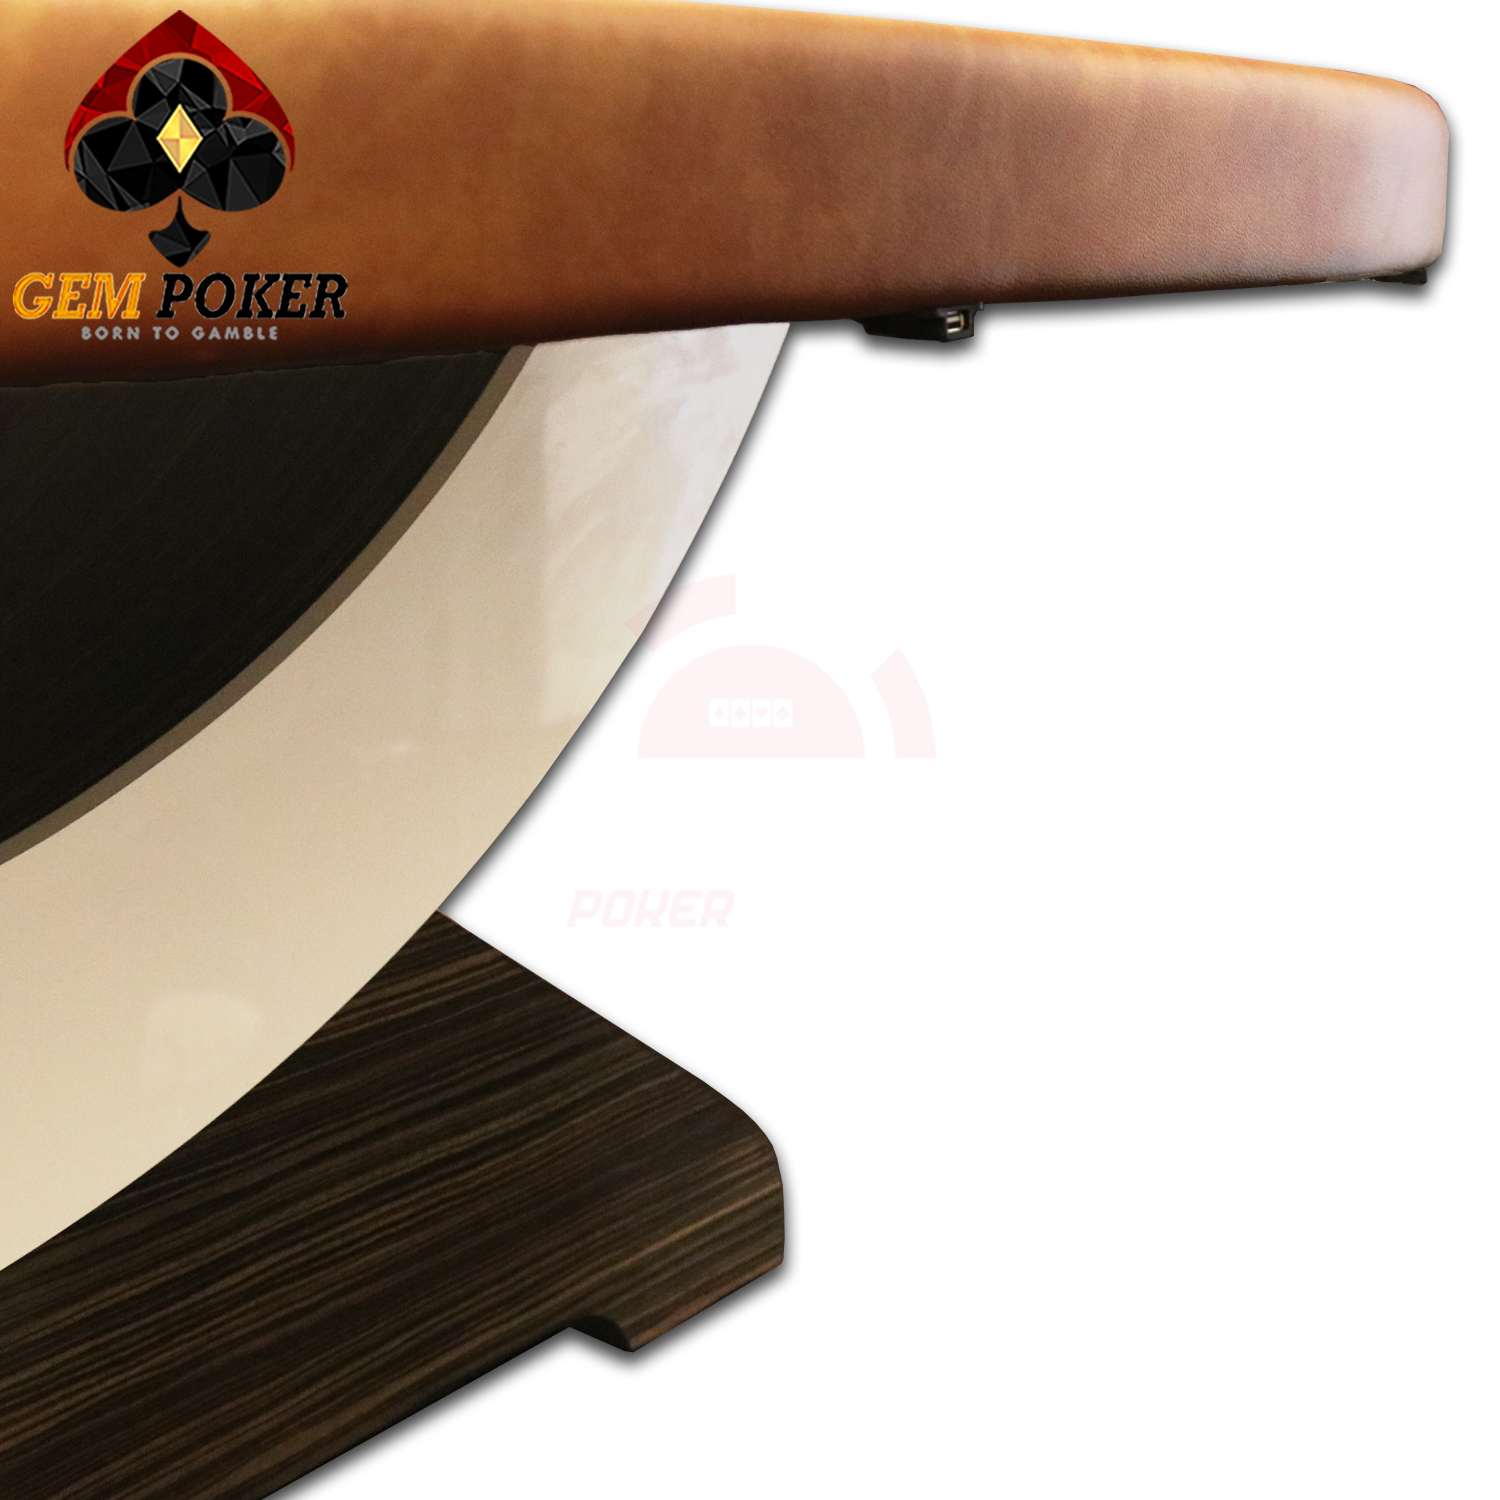 LUX SERIES POKER TABLE SOLAR ECLIPSE P52